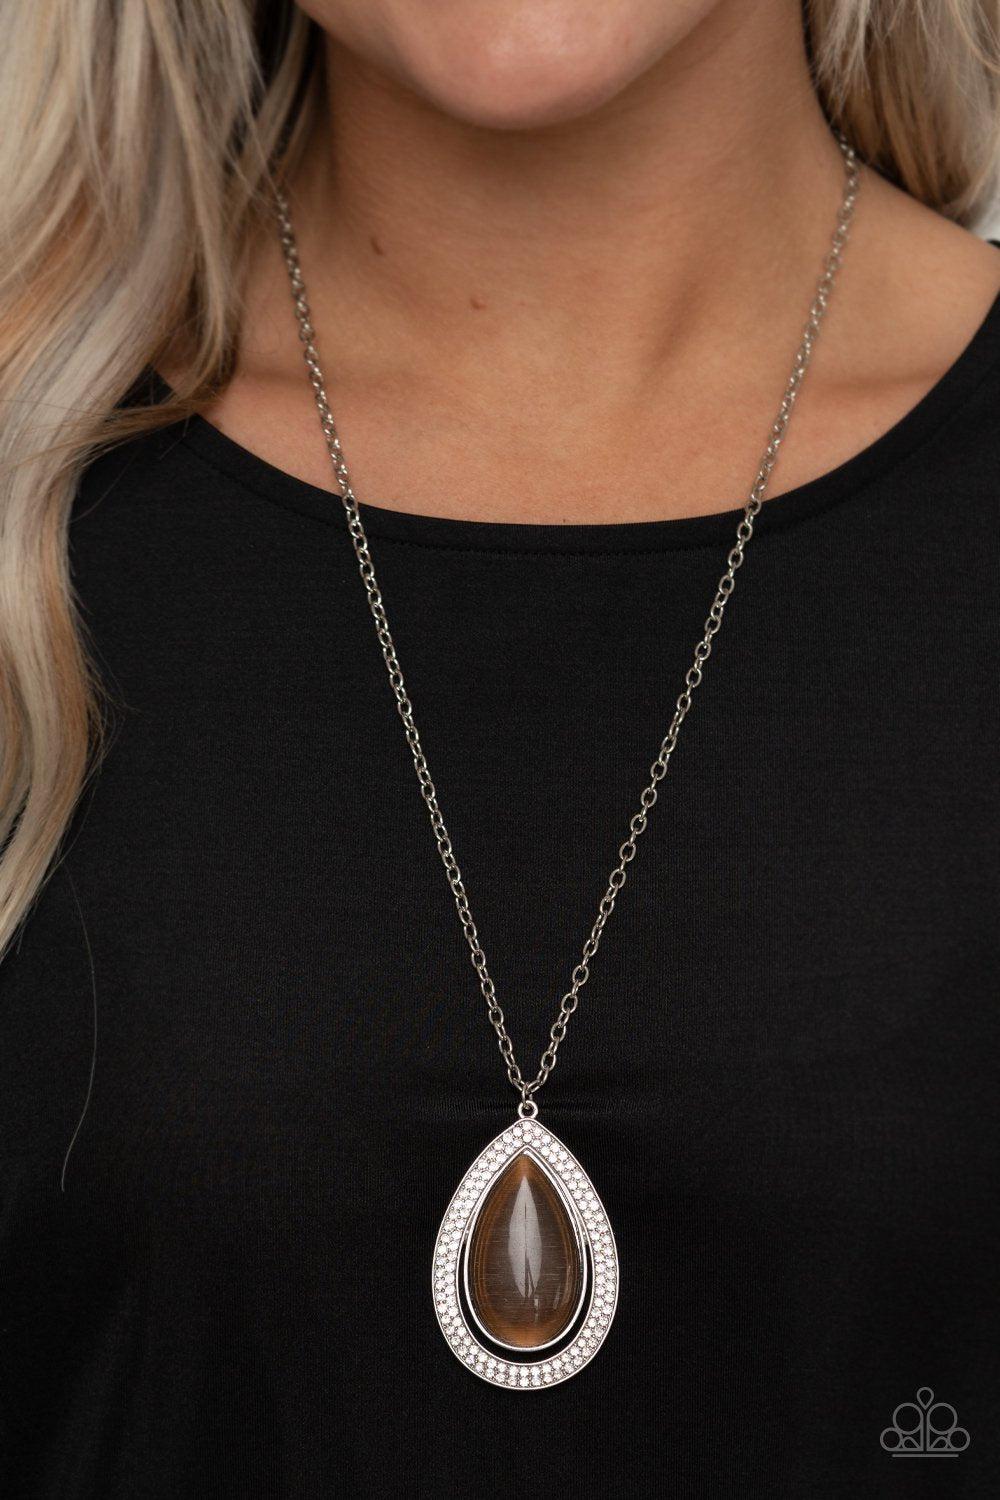 You Dropped This Brown Teardrop Cat's Eye Stone Necklace - Paparazzi Accessories-CarasShop.com - $5 Jewelry by Cara Jewels